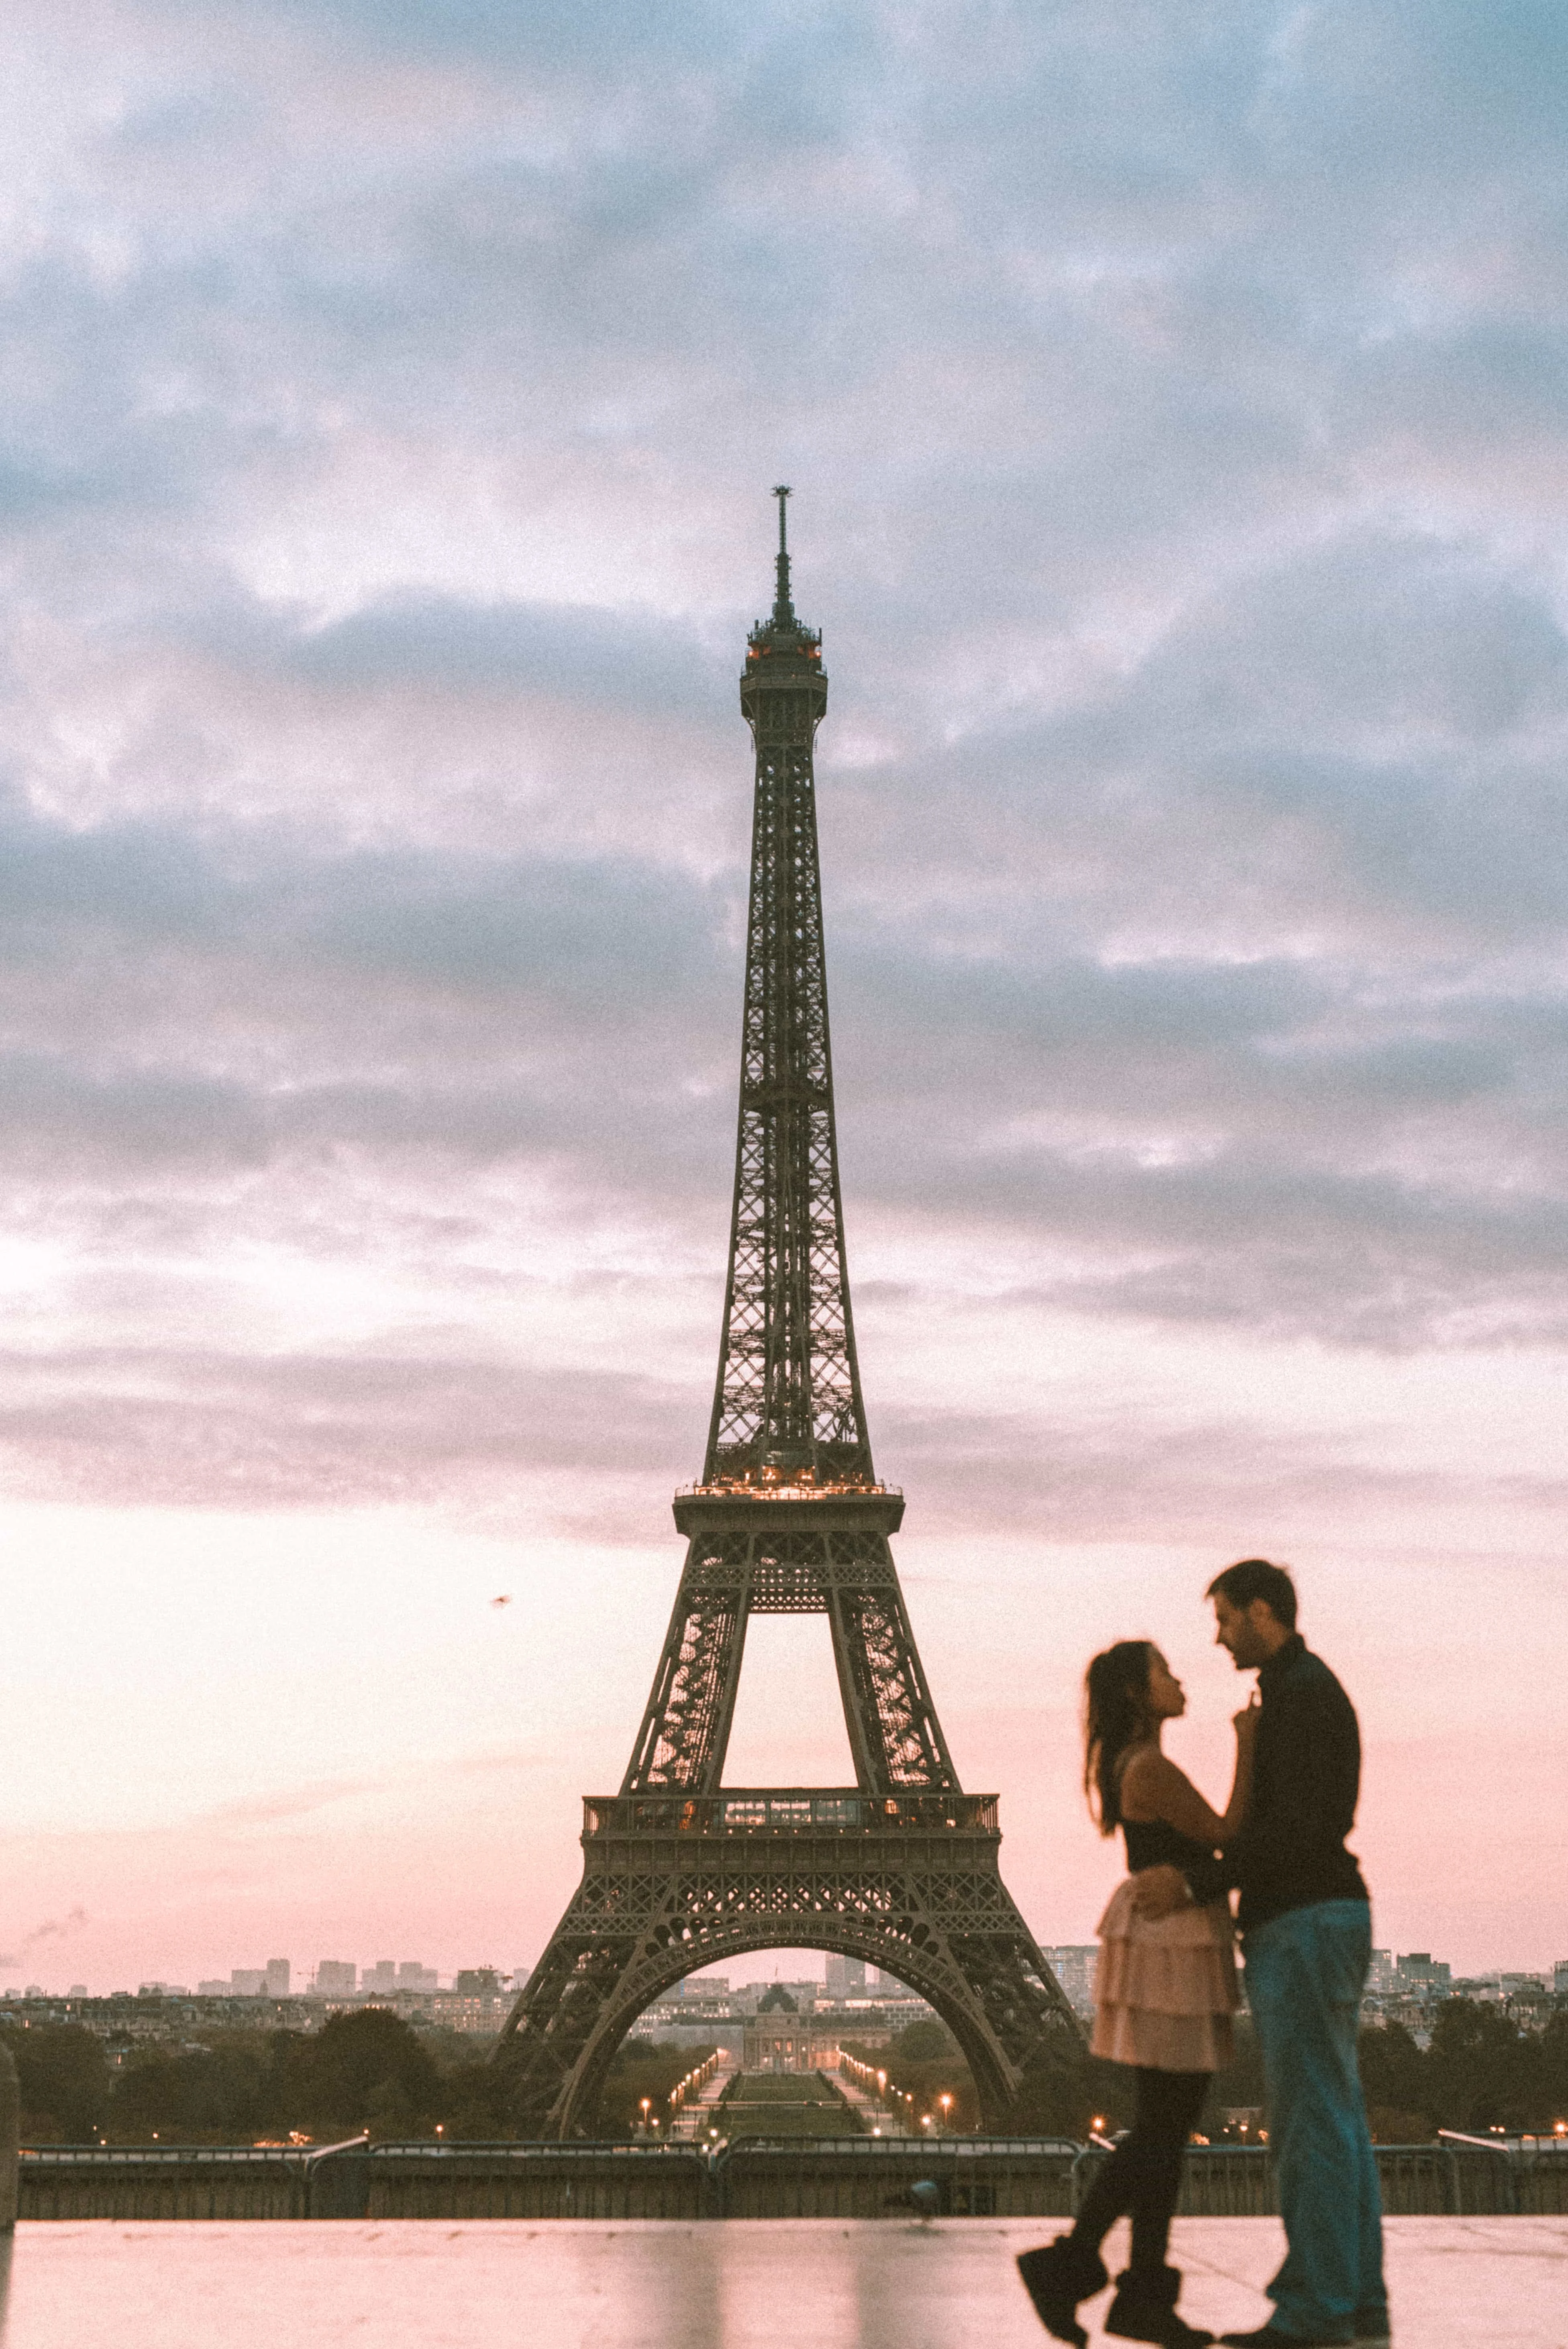 Most Instagrammable places in Paris, Eiffel Tower